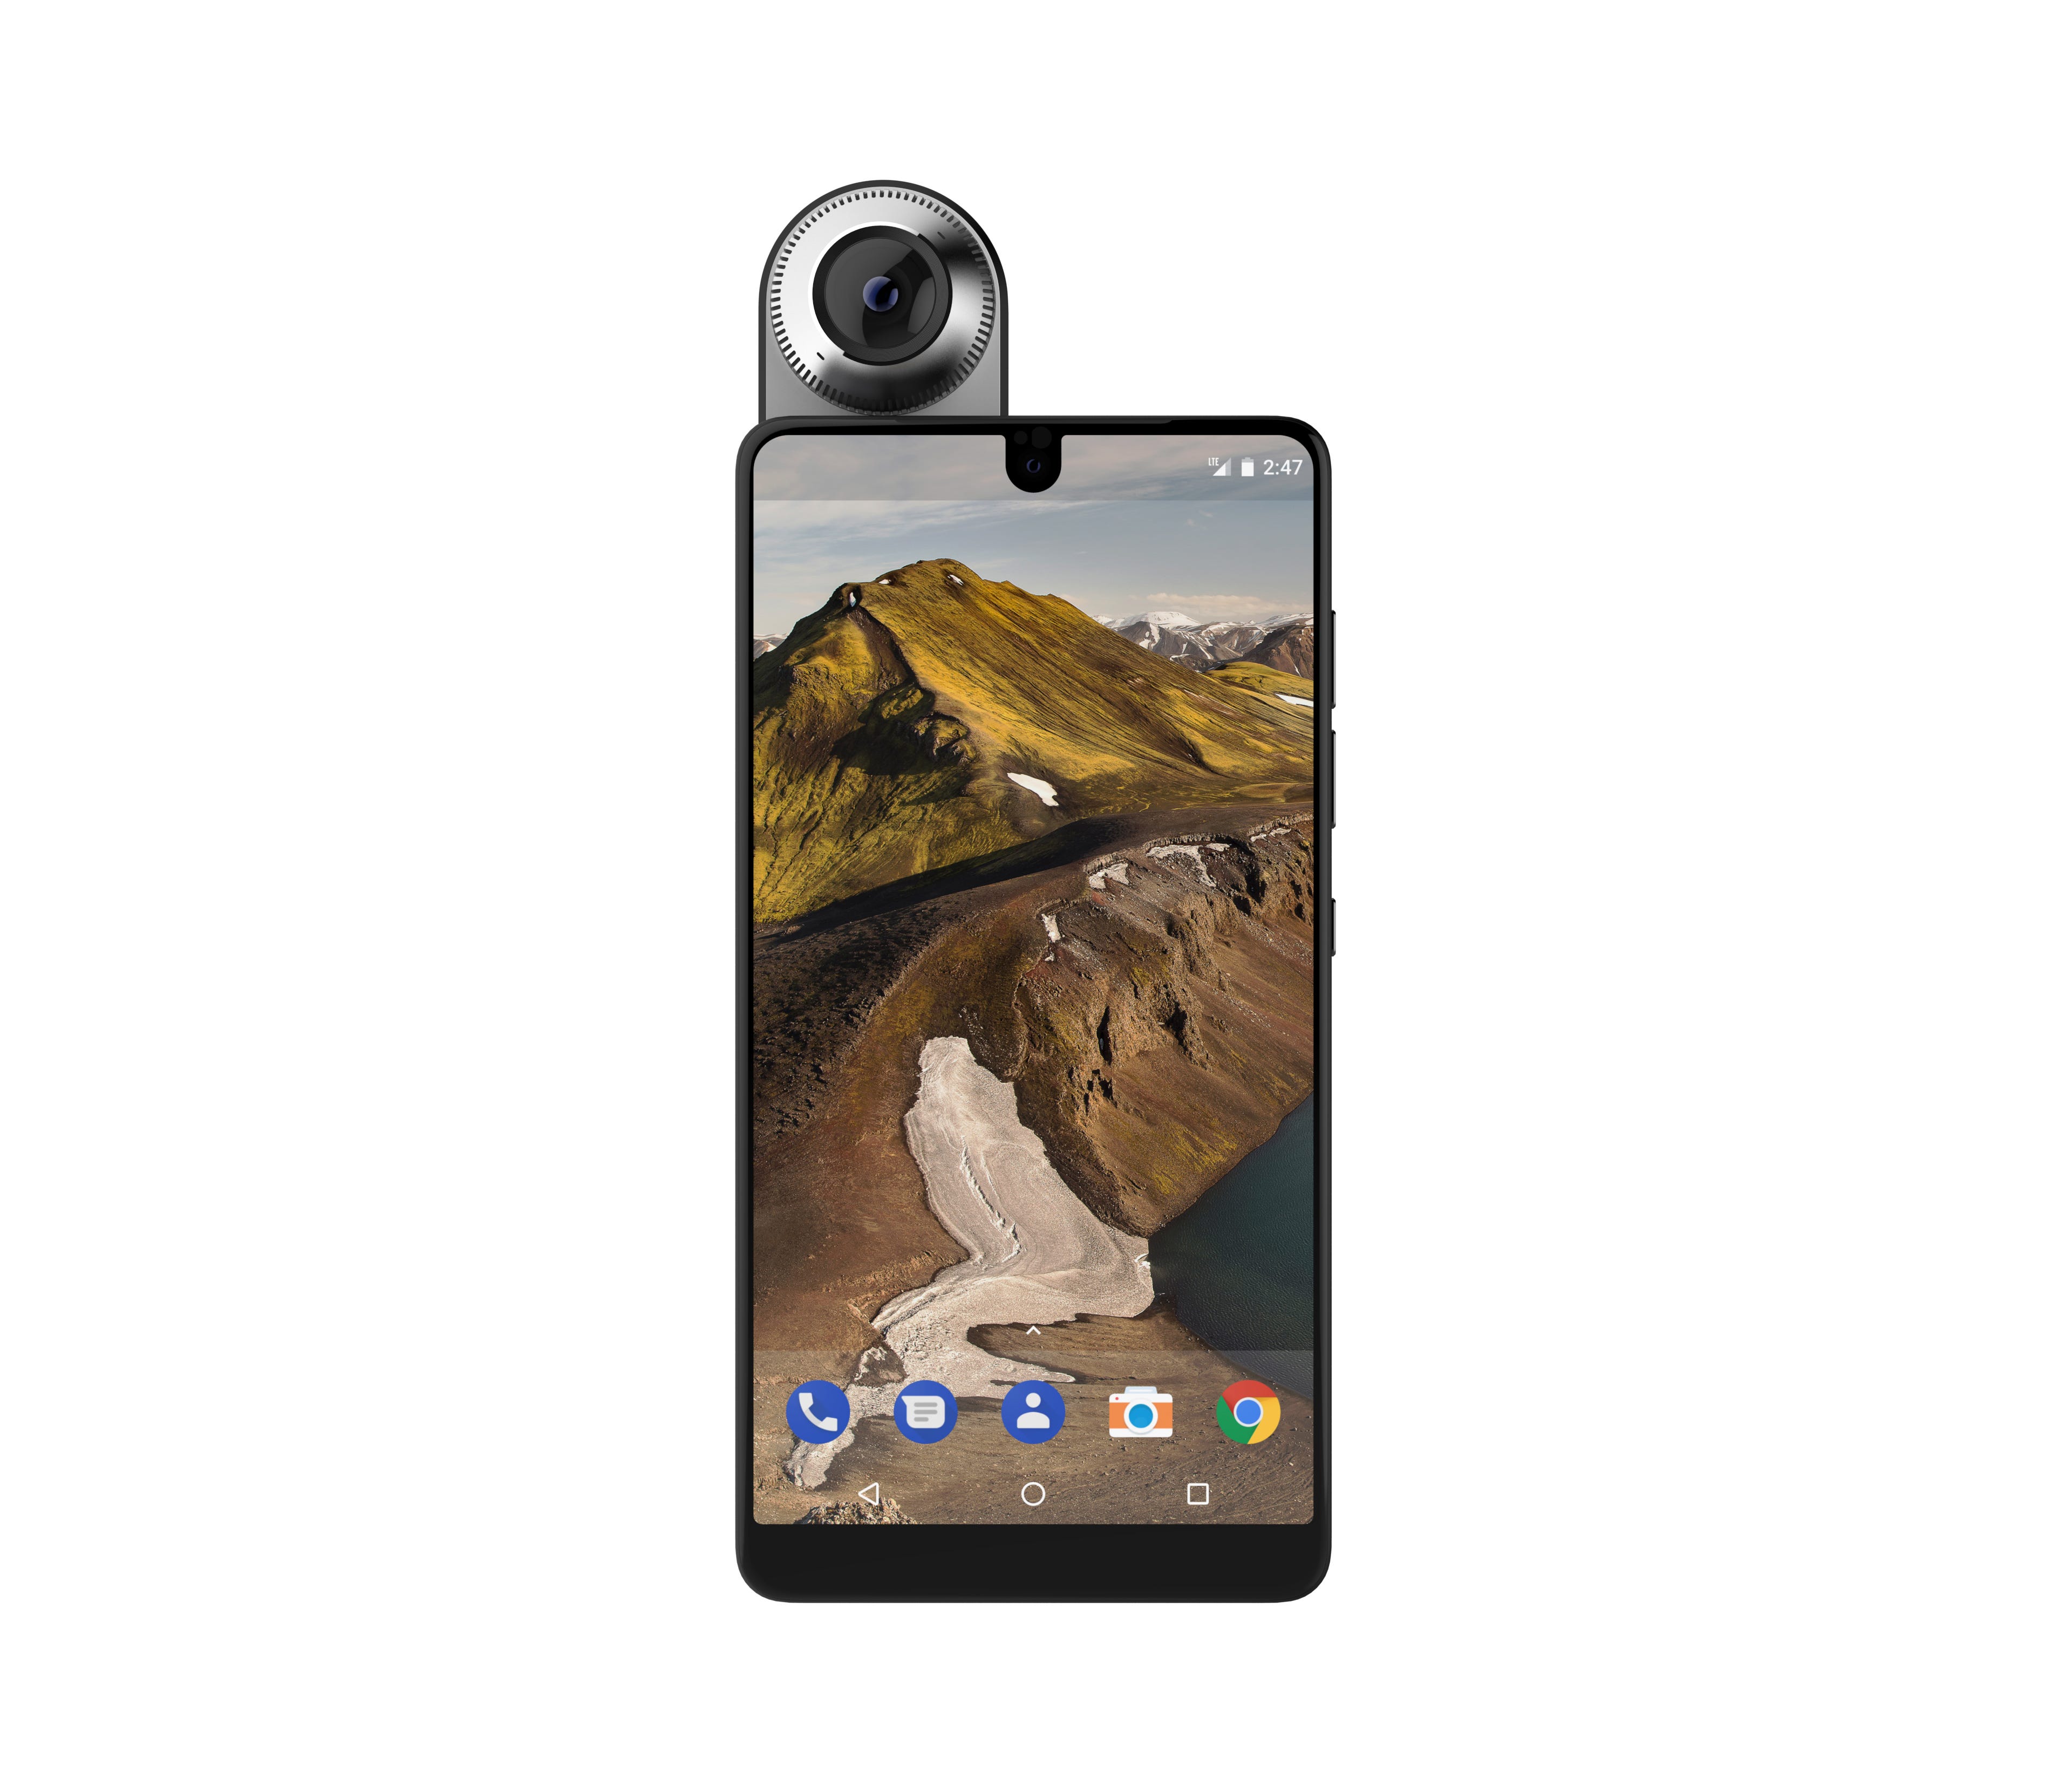 The Essential phone with its 360-degree accessory camera.